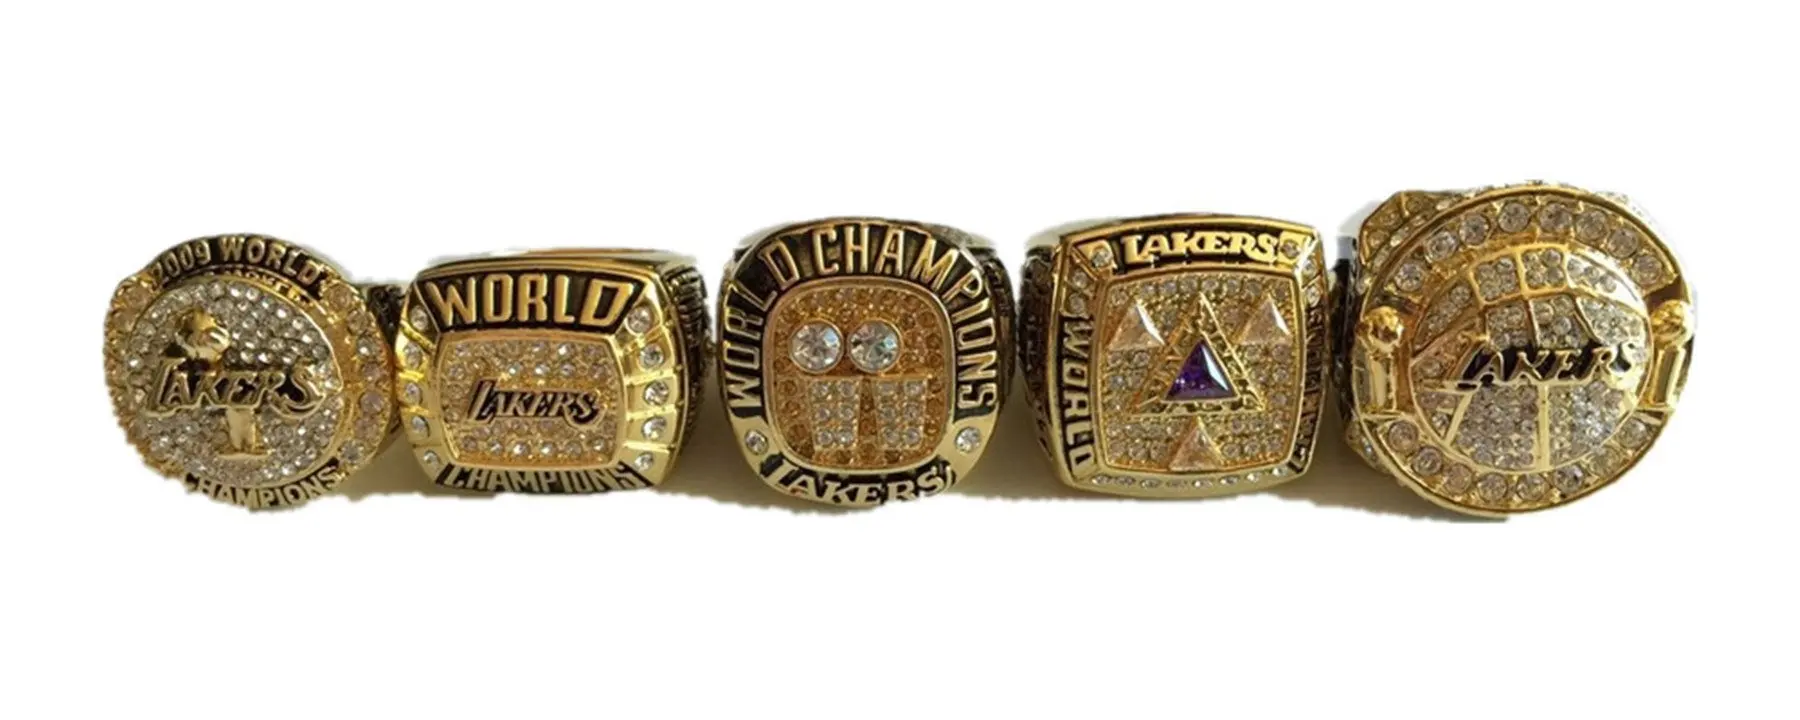 how many nba championship rings does kobe bryant have